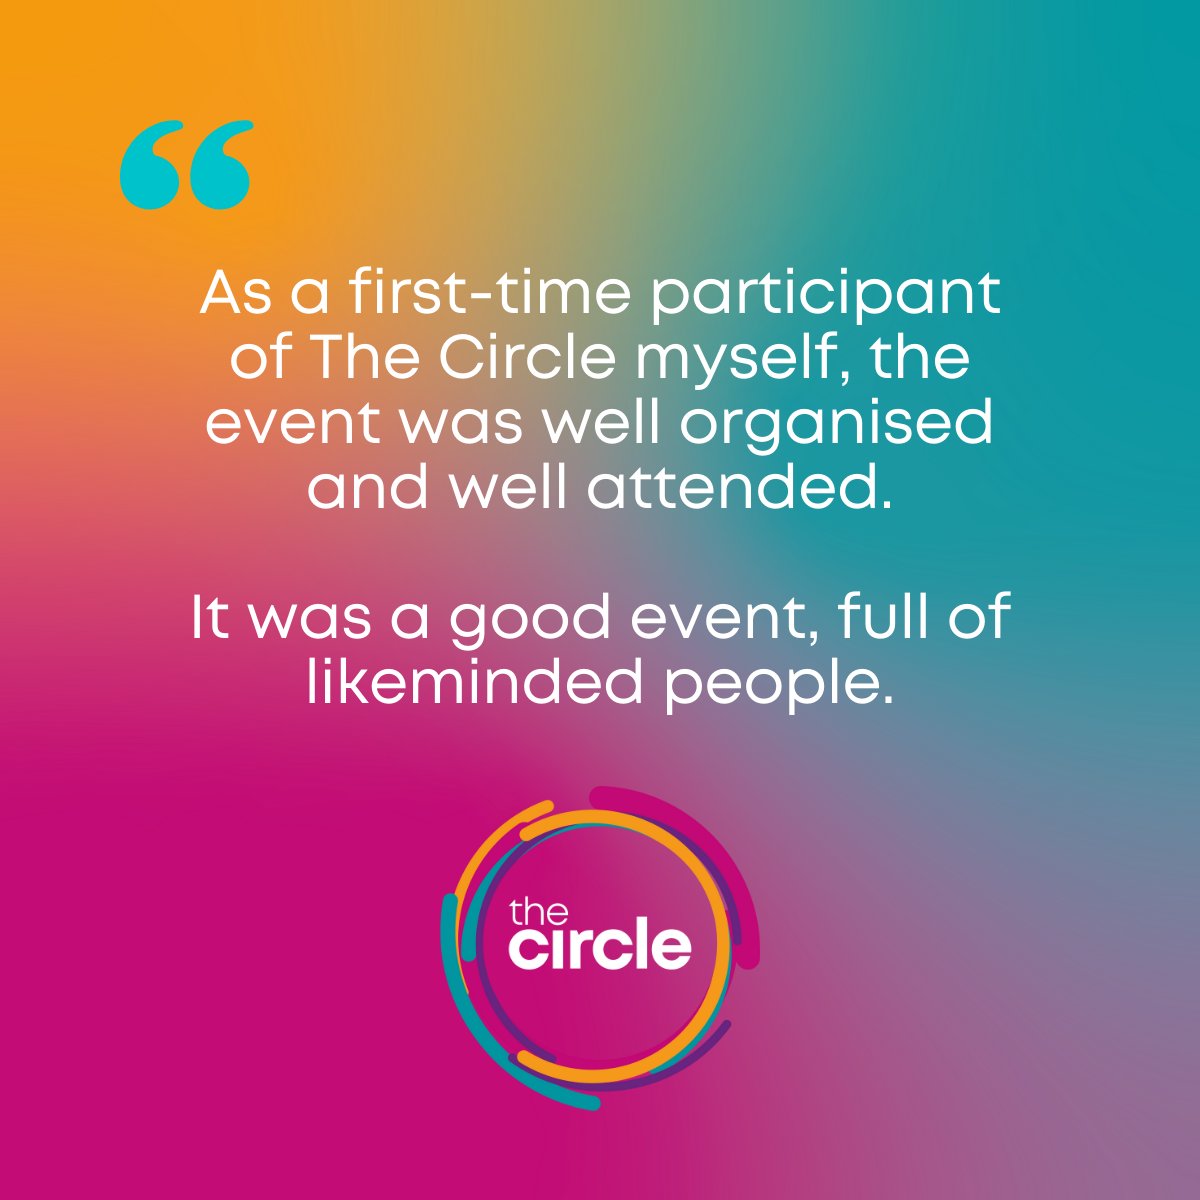 Our events aim to provide the perfect environment for you to build relationships and grow both personally and professionally.

Take a look what some of our members have said ⬇️

#Testimonial #Feedback #JoinTheCircle